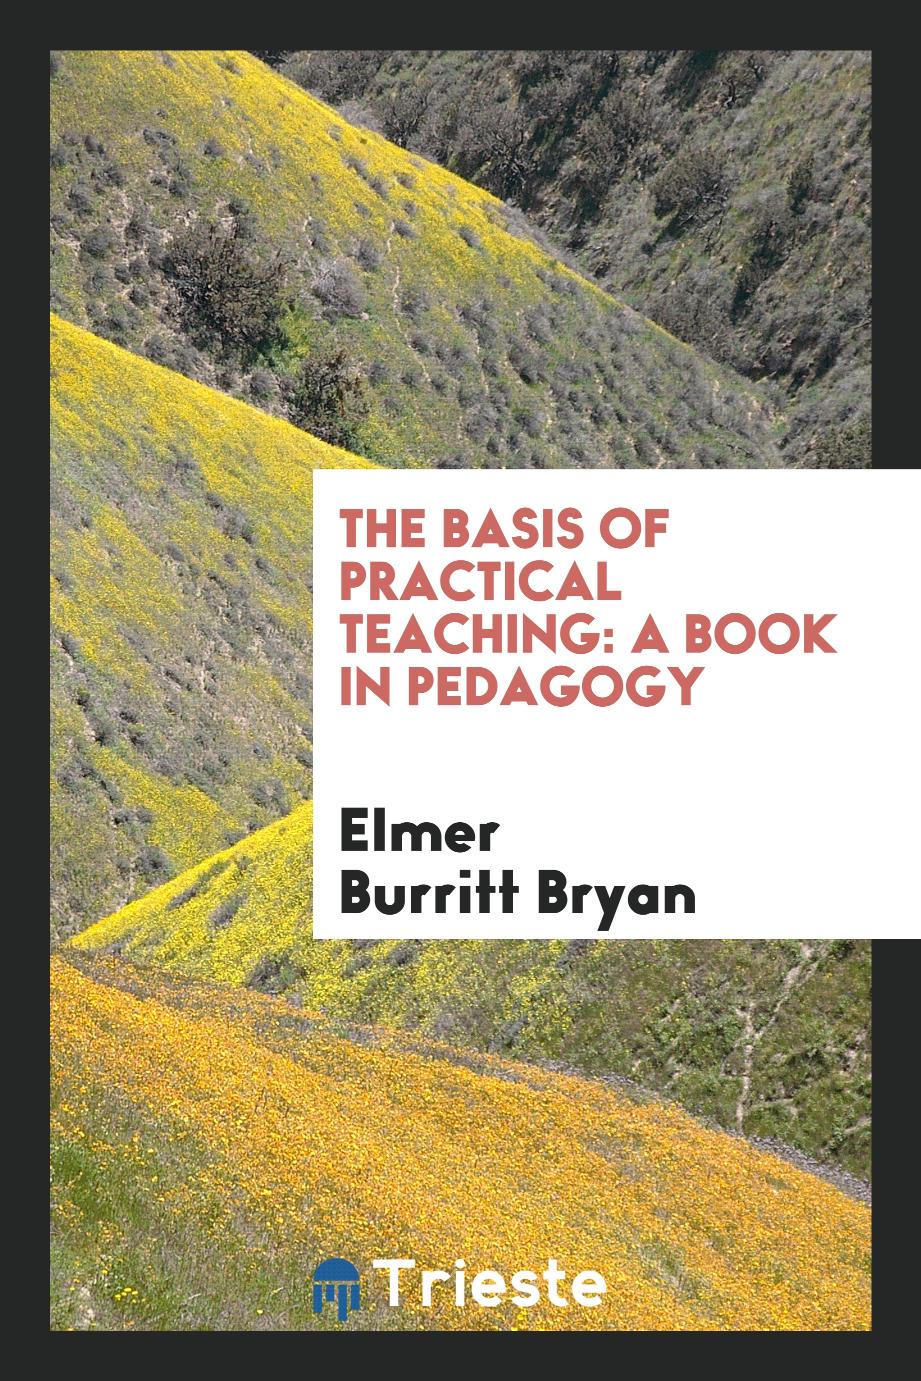 The Basis of Practical Teaching: A Book in Pedagogy